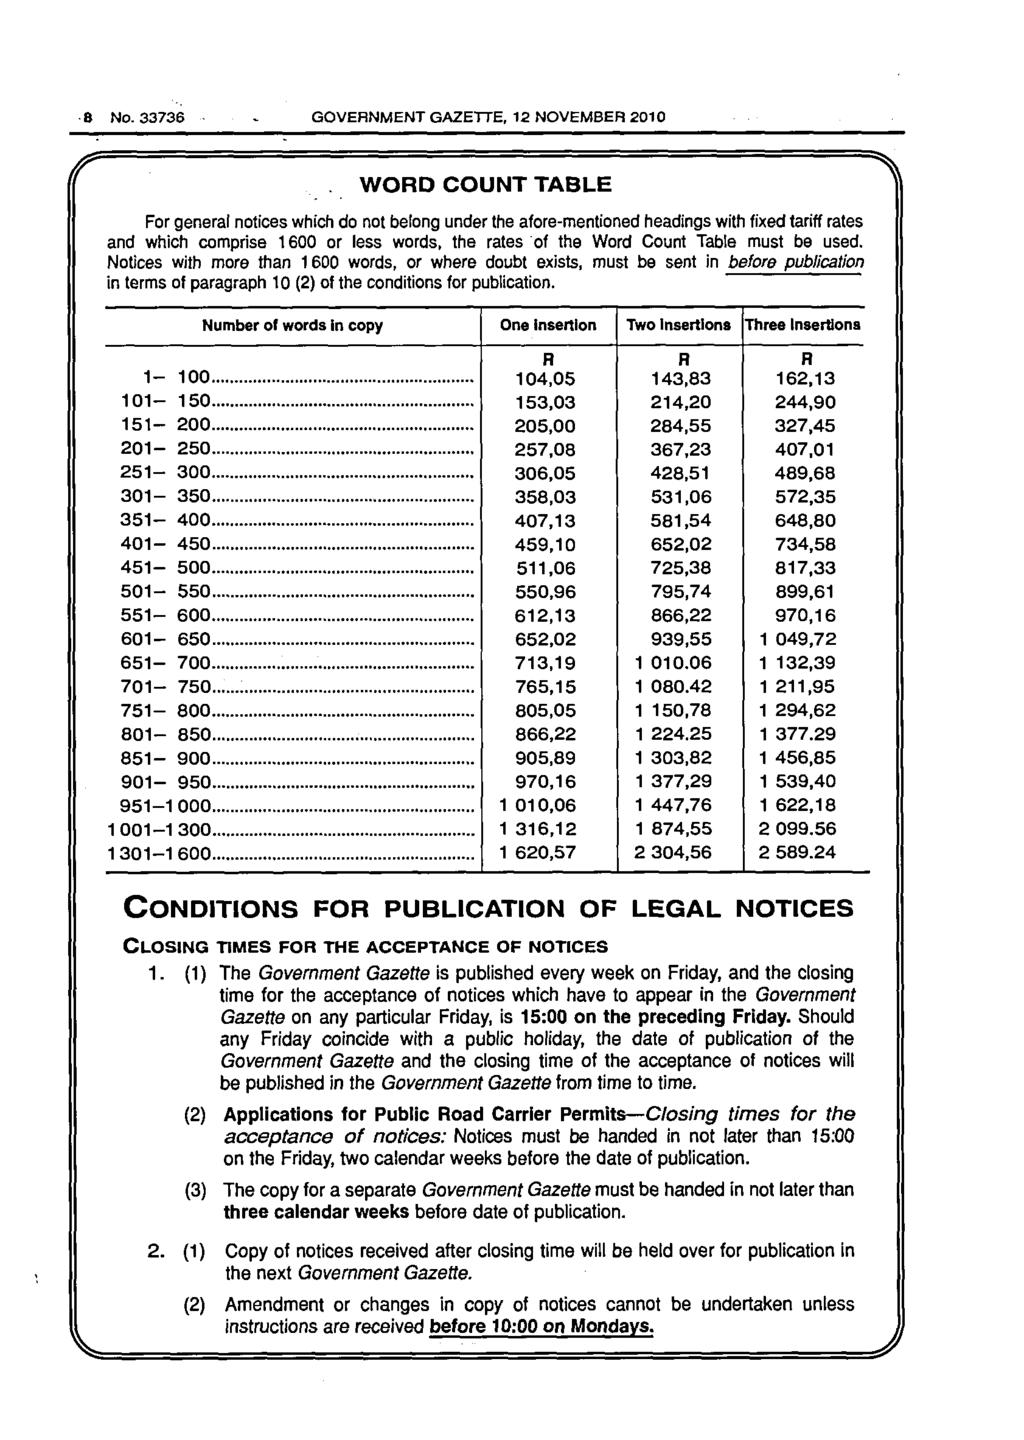 8 No. 33736 GOVERNMENT GAZETTE, 12 NOVEMBER 2010 WORD COUNT TABLE For general notices which do not belong under the afore-mentioned headings with fixed tariff rates and which comprise 1600 or less